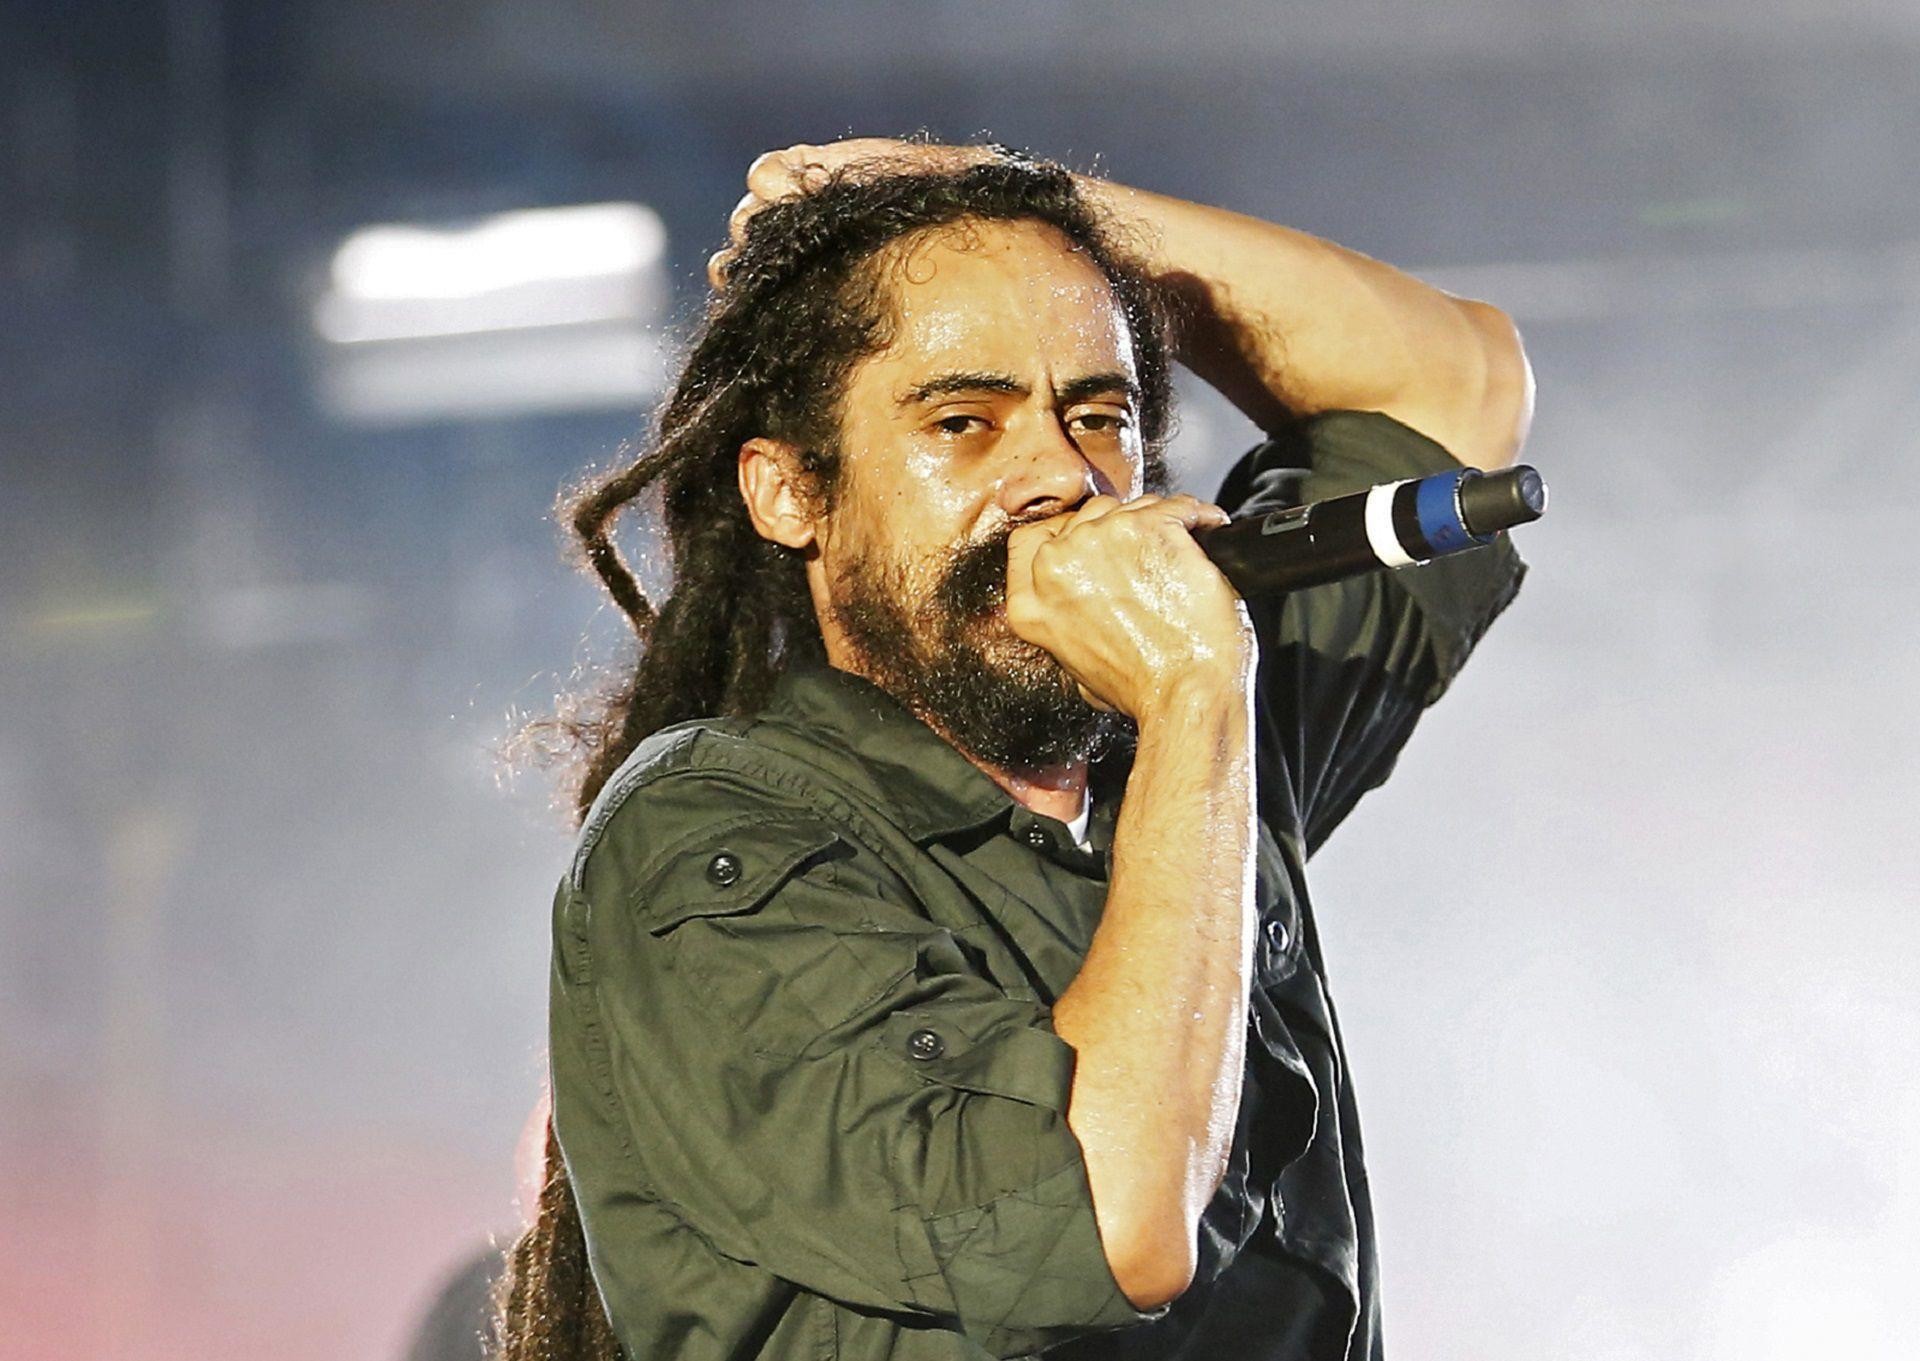 1920x1361 Damian Marley Wallpapers Images Photos Pictures Backgrounds